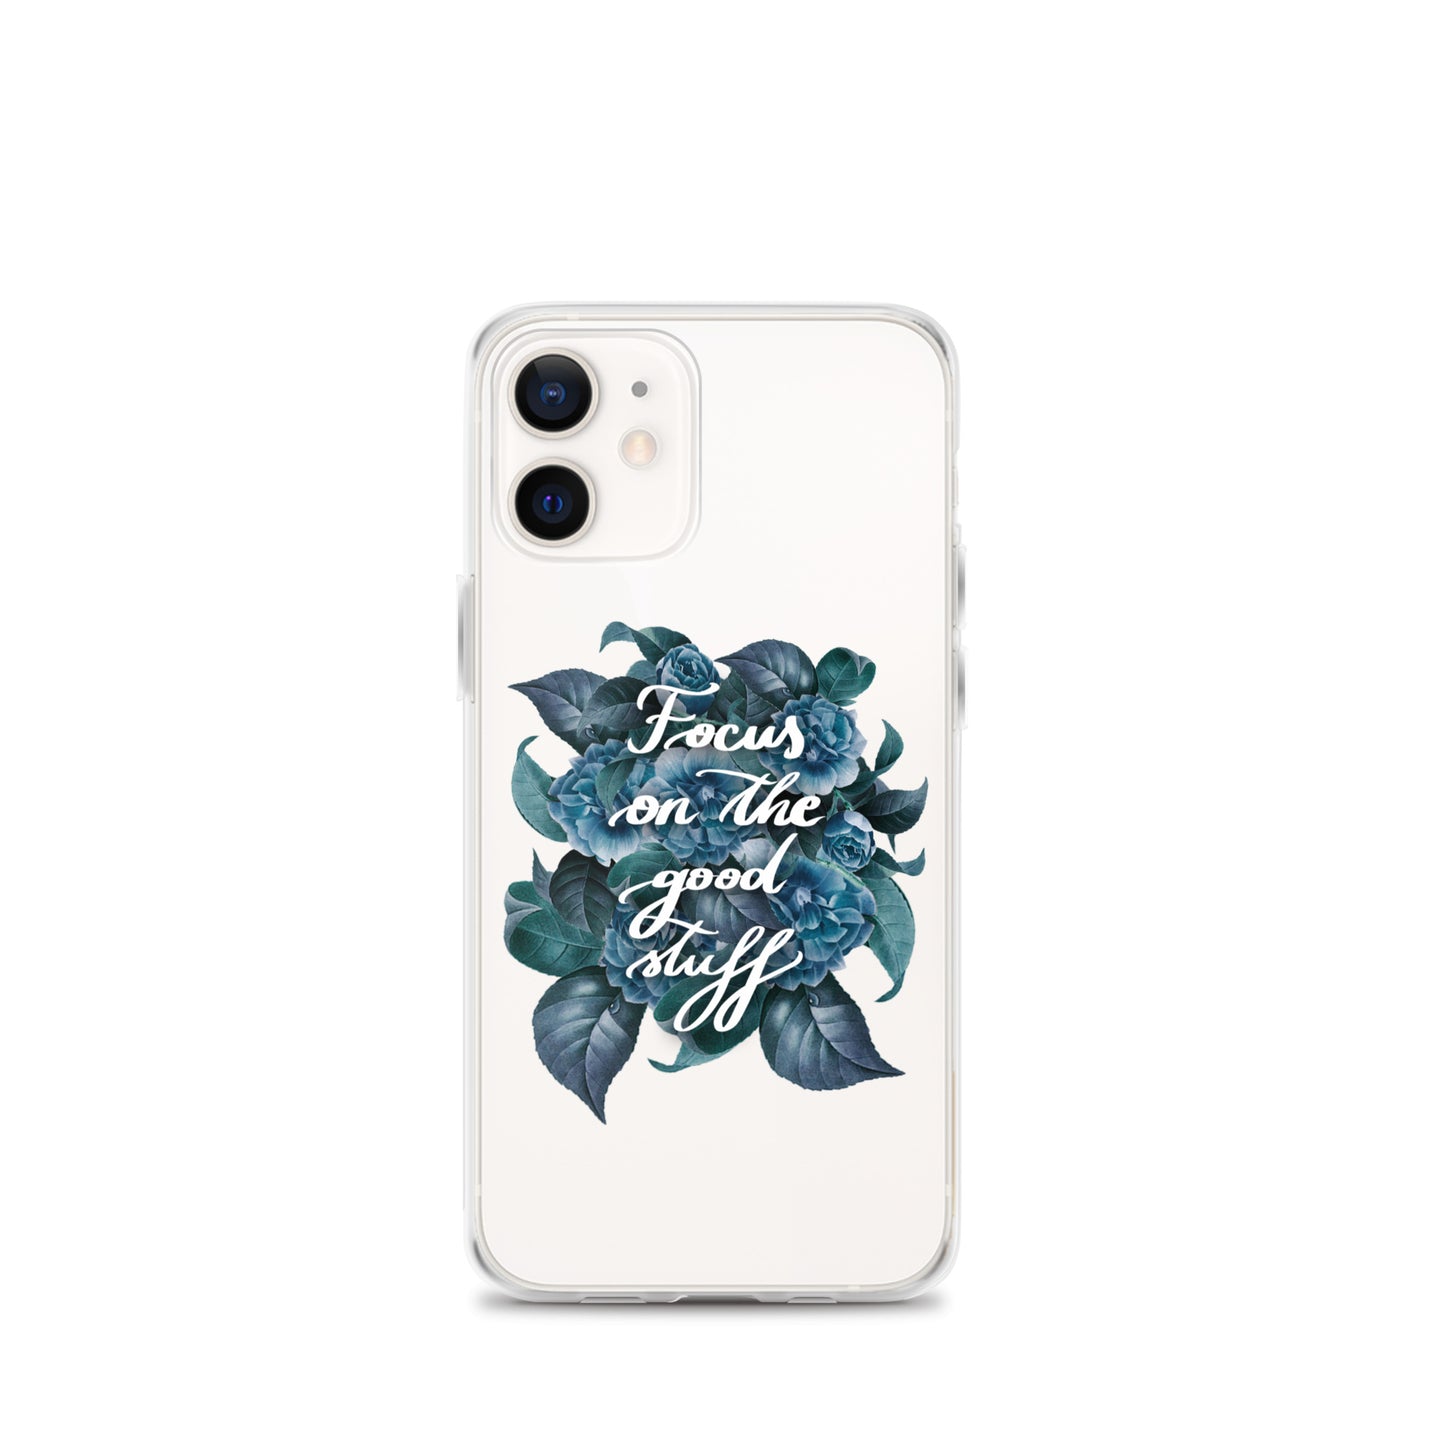 Clear Case for iPhone® "Focus on the good stuff"